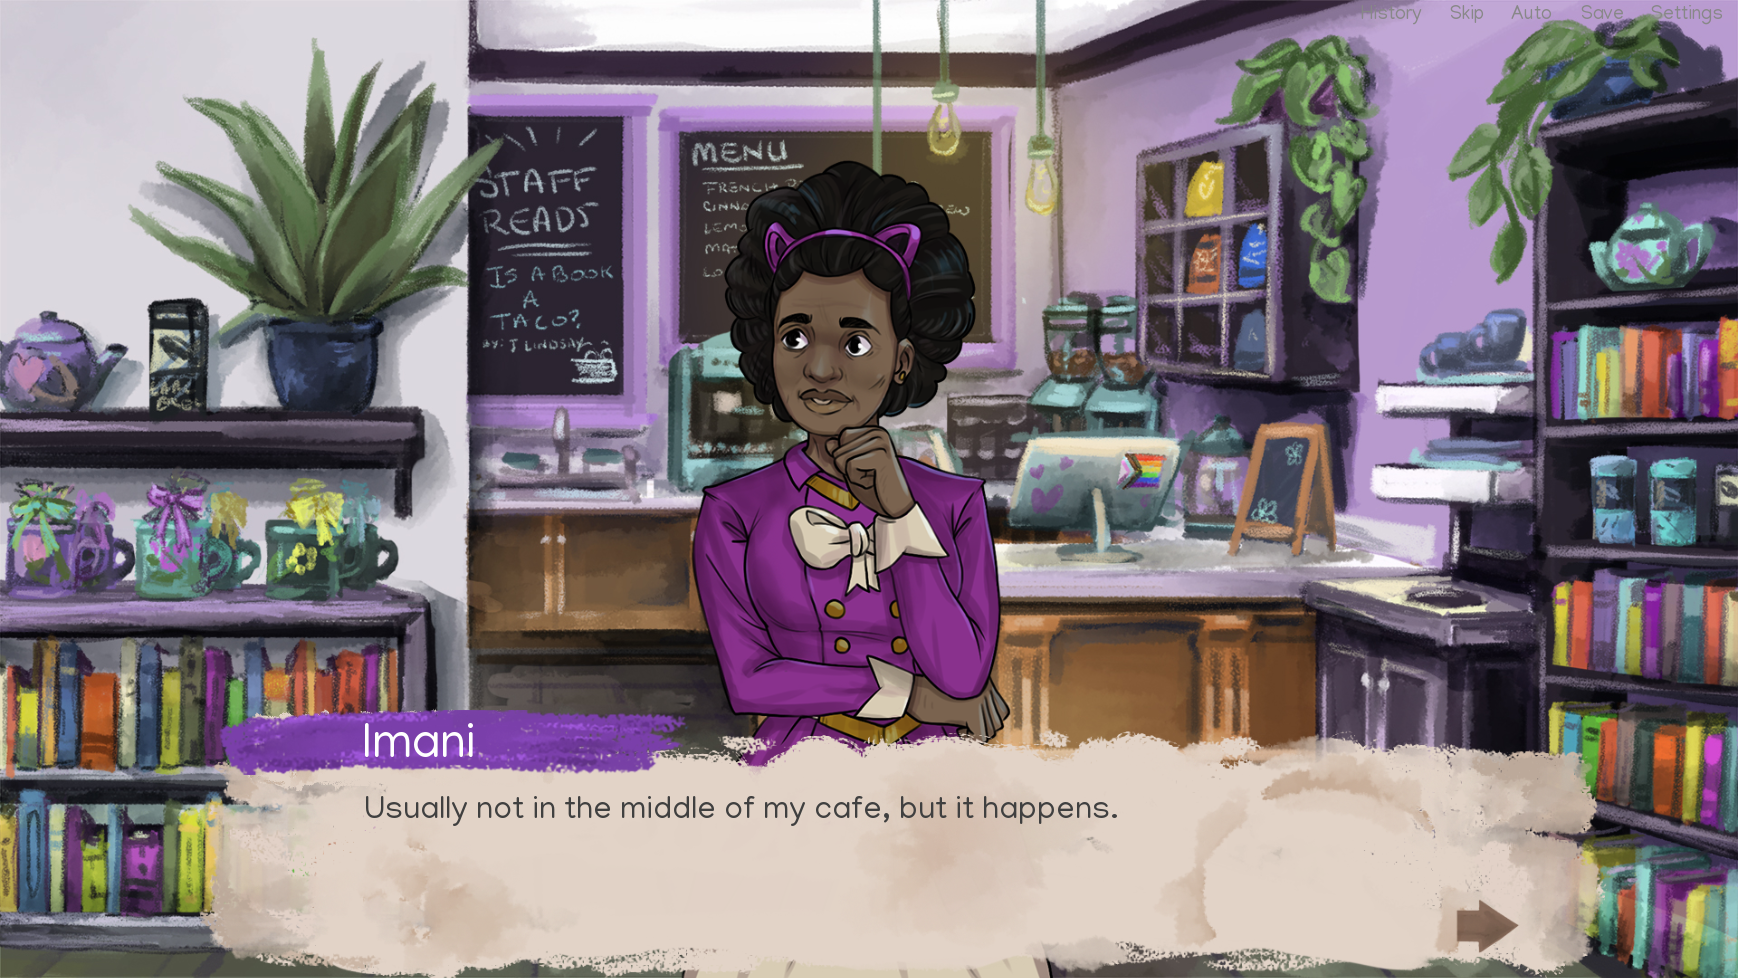 Imani, a black woman in a purple dress wearing cat ears saying usually not in the middle of my cafe, but it happens.